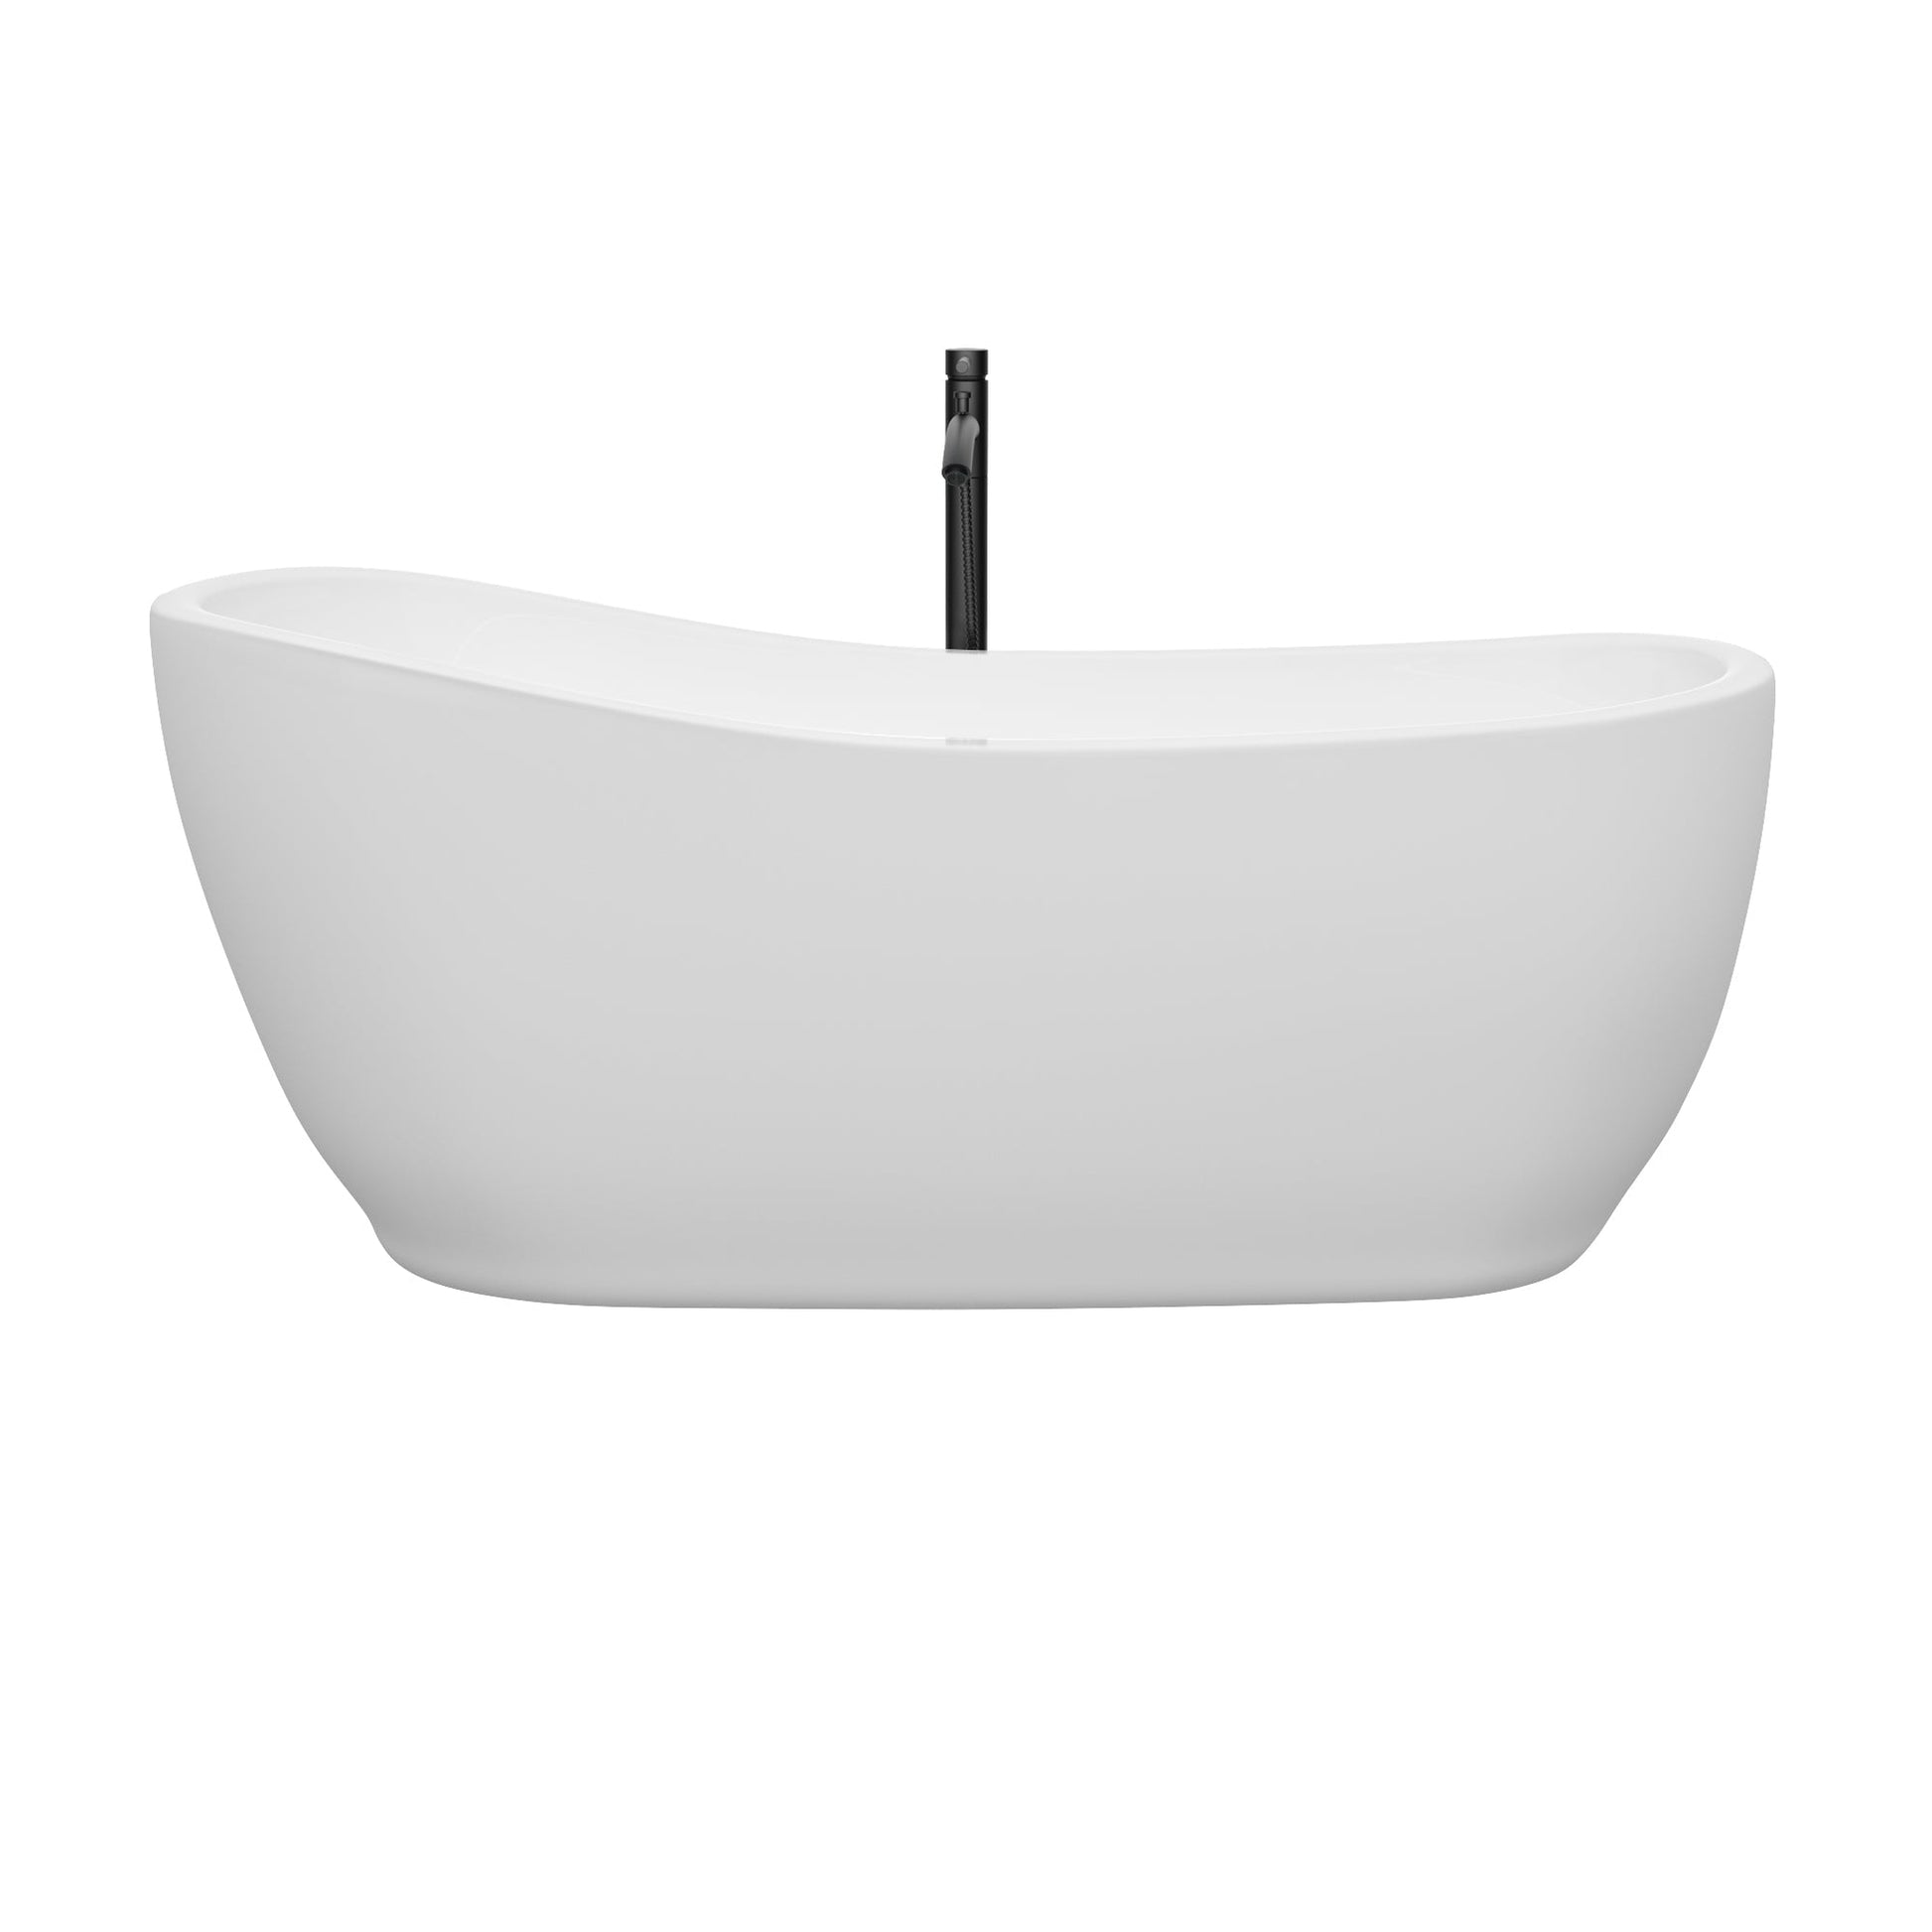 Wyndham Collection Margaret 66" Freestanding Bathtub in White With Floor Mounted Faucet, Drain and Overflow Trim in Matte Black